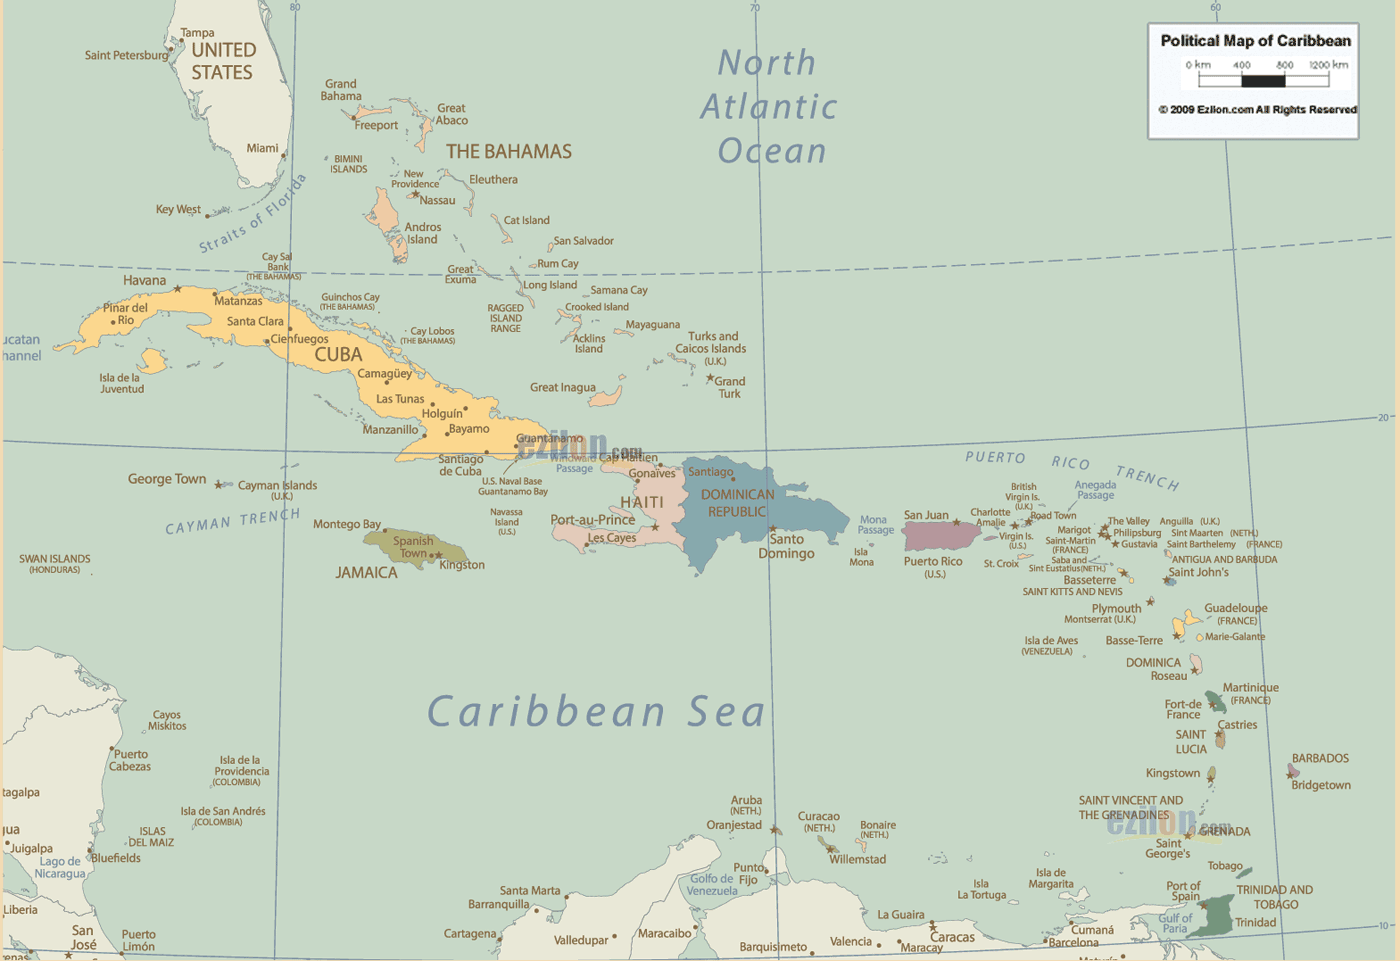 List of Caribbean countries by population